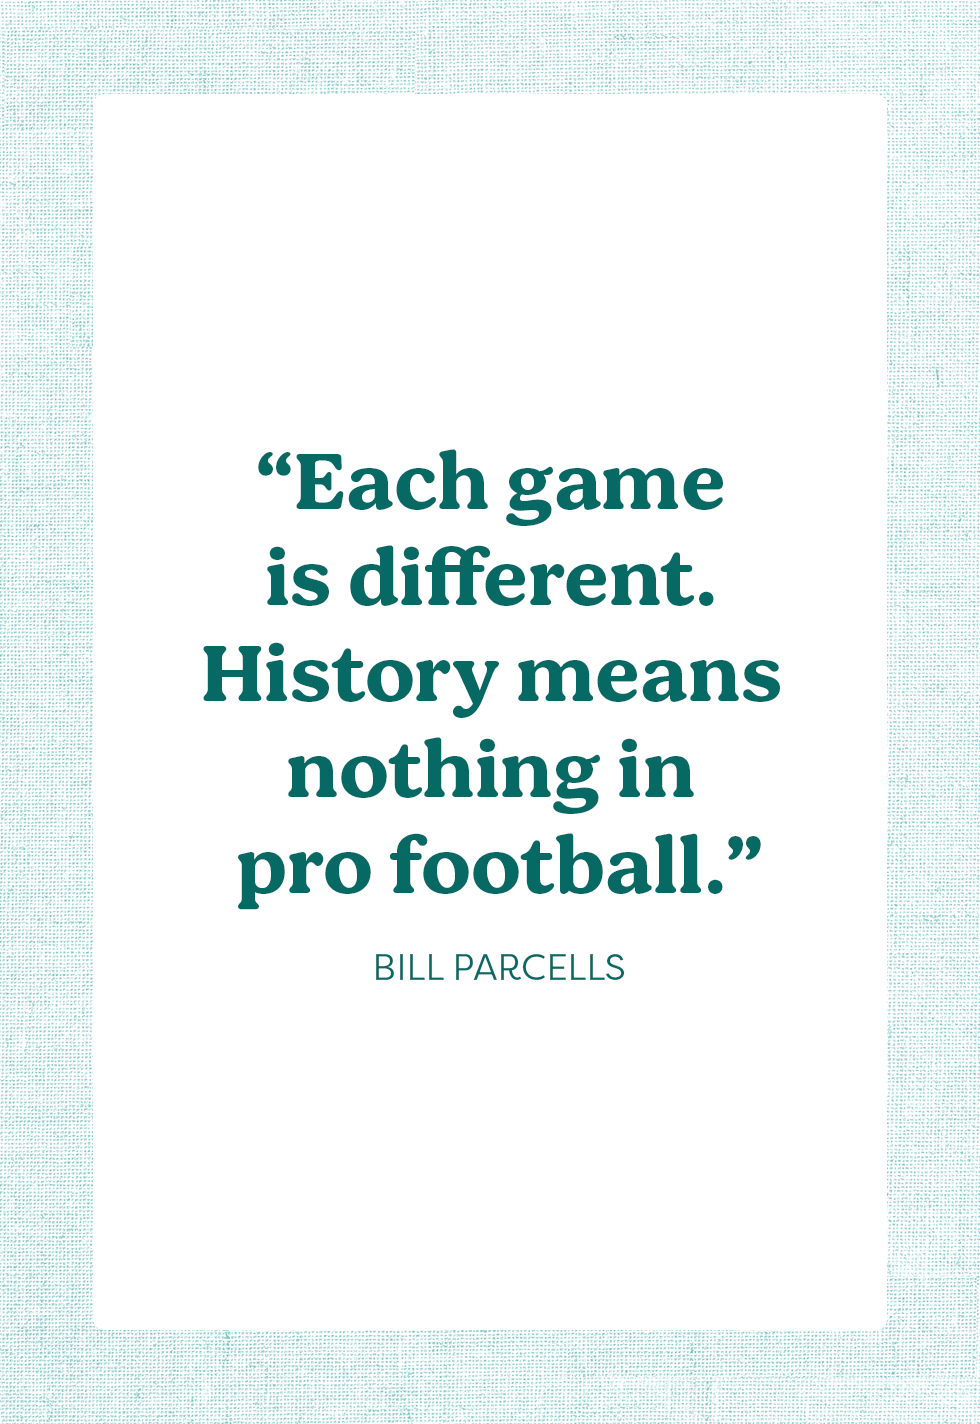 Top 25 Game Begins Quotes: Famous Quotes & Sayings About Game Begins